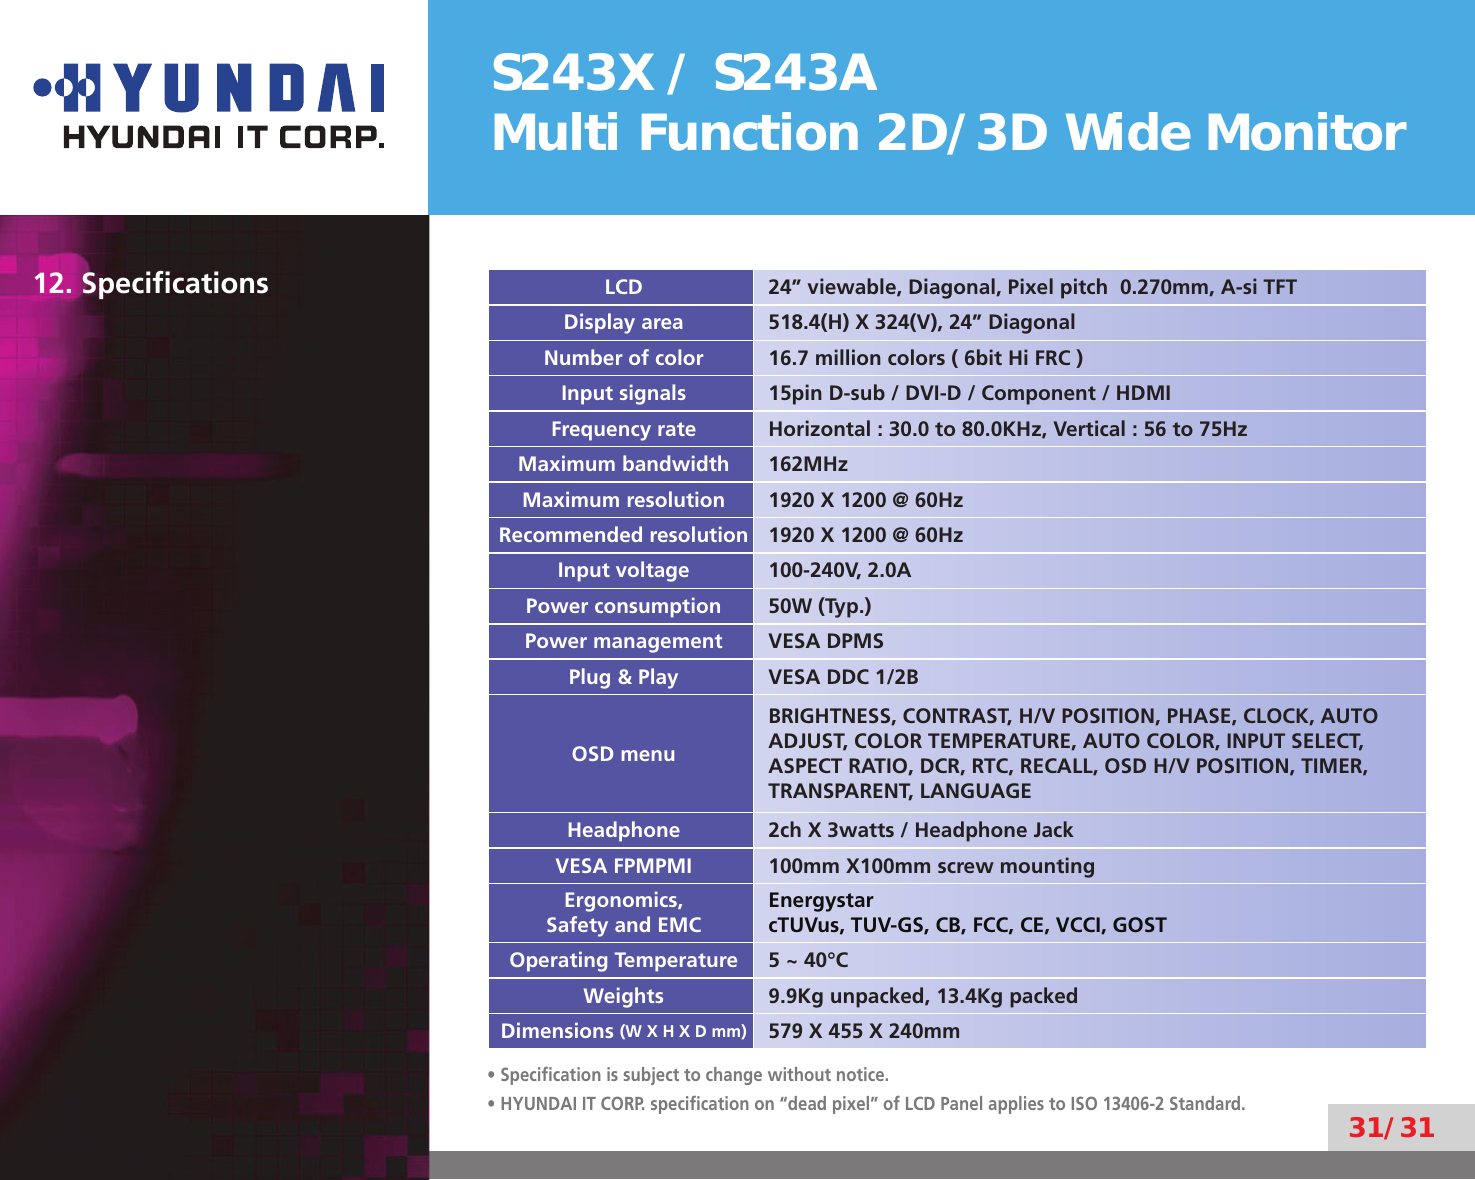 S243X / S243AMulti Function 2D/3D Wide Monitor31/3112. Speciﬁcations LCD 24” viewable, Diagonal, Pixel pitch  0.270mm, A-si TFTDisplay area 518.4(H) X 324(V), 24” DiagonalNumber of color 16.7 million colors ( 6bit Hi FRC )Input signals 15pin D-sub / DVI-D / Component / HDMIFrequency rate Horizontal : 30.0 to 80.0KHz, Vertical : 56 to 75HzMaximum bandwidth 162MHzMaximum resolution 1920 X 1200 @ 60HzRecommended resolution 1920 X 1200 @ 60HzInput voltage 100-240V, 2.0APower consumption 50W (Typ.)Power management VESA DPMSPlug &amp; Play VESA DDC 1/2BOSD menuBRIGHTNESS, CONTRAST, H/V POSITION, PHASE, CLOCK, AUTO ADJUST, COLOR TEMPERATURE, AUTO COLOR, INPUT SELECT, ASPECT RATIO, DCR, RTC, RECALL, OSD H/V POSITION, TIMER, TRANSPARENT, LANGUAGEHeadphone 2ch X 3watts / Headphone JackVESA FPMPMI 100mm X100mm screw mountingErgonomics,Safety and EMCEnergystar cTUVus, TUV-GS, CB, FCC, CE, VCCI, GOSTOperating Temperature 5 ~ 40°CWeights 9.9Kg unpacked, 13.4Kg packedDimensions (W X H X D mm) 579 X 455 X 240mm•Specicationissubjecttochangewithoutnotice.•HYUNDAIITCORP.specicationon“deadpixel”ofLCDPanelappliestoISO13406-2Standard.